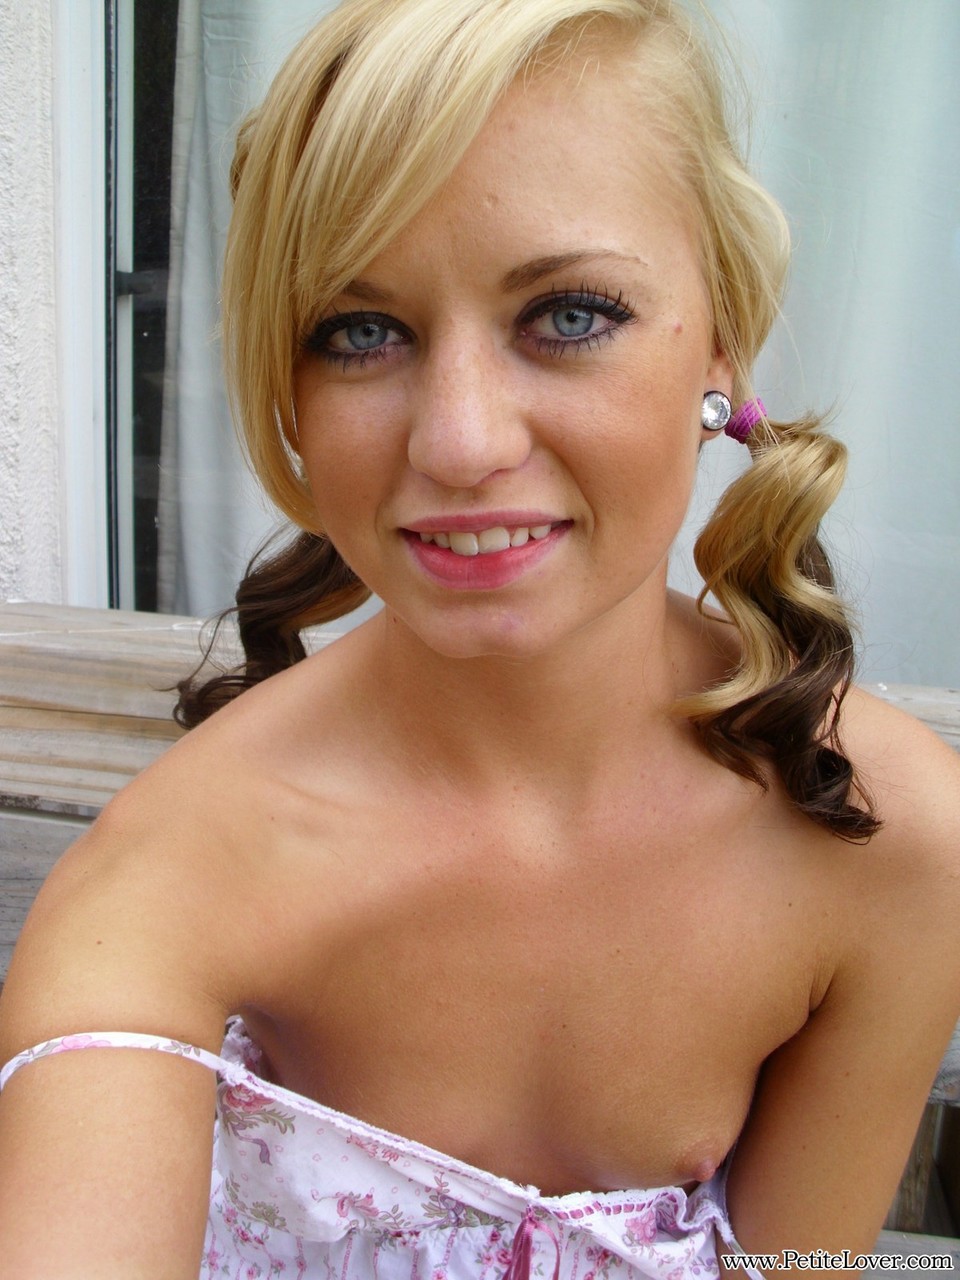 Cute blonde Tiff in pigtails showing off her wee small tits & tiny bald pussy порно фото #428478640 | Petite Lover Pics, Tiff, Amateur, мобильное порно